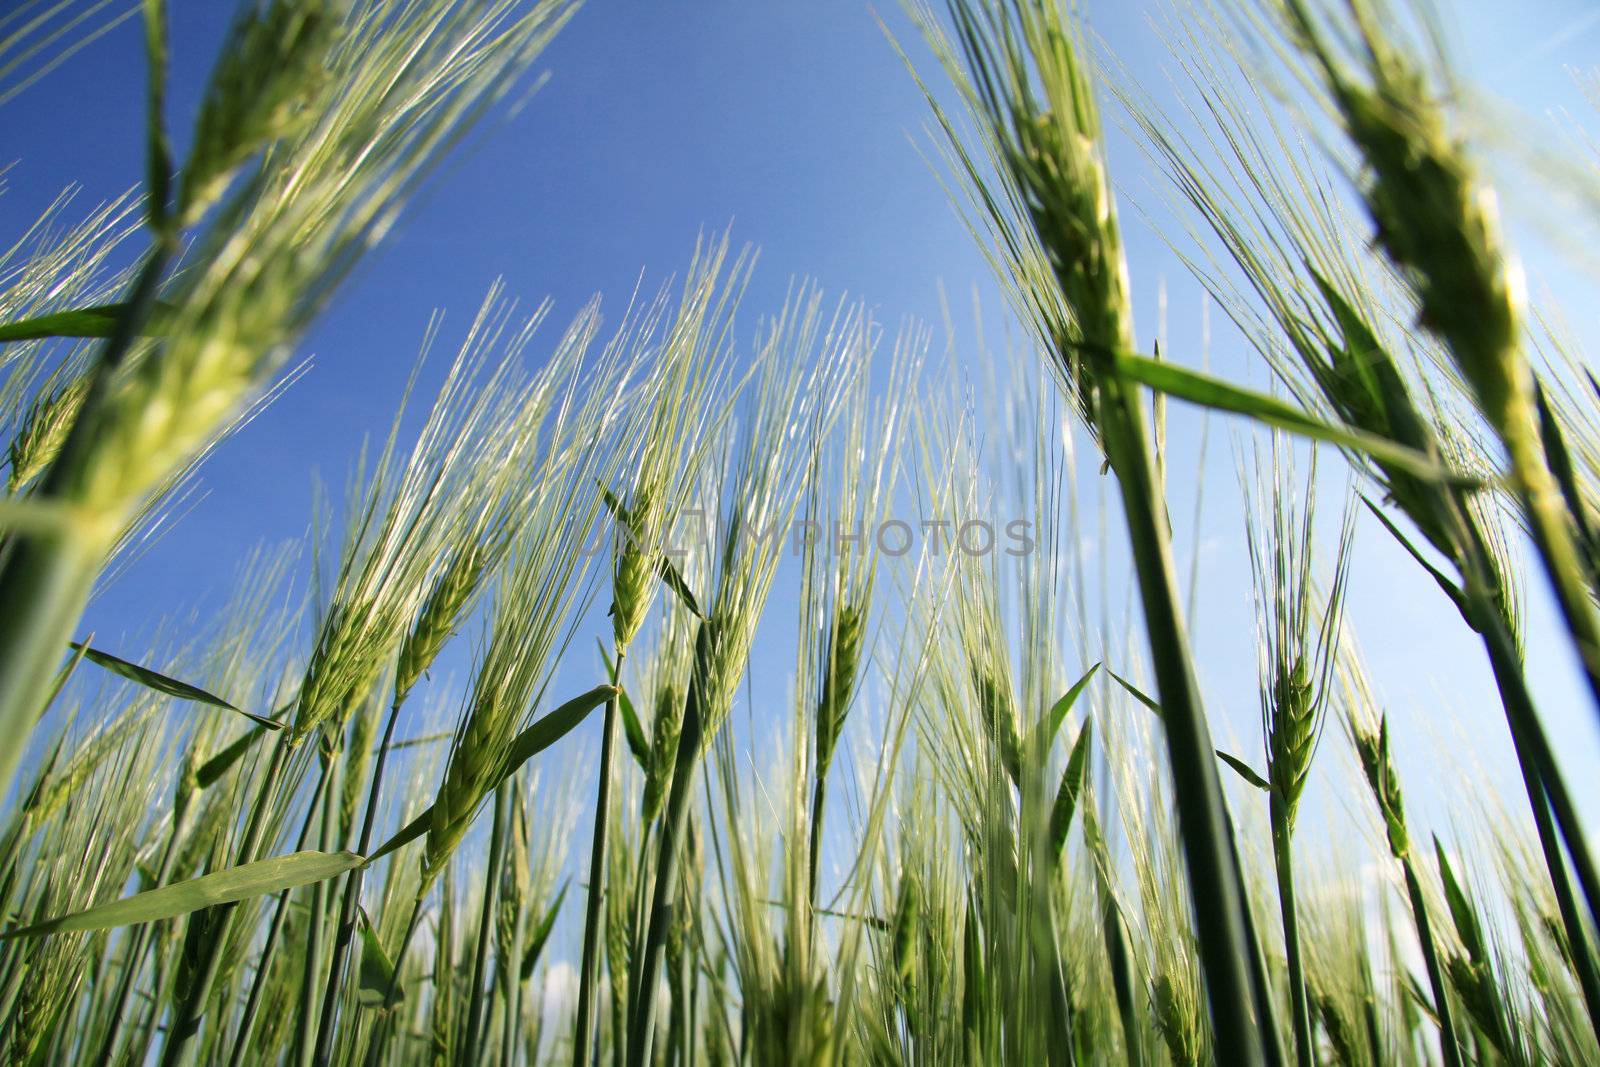 wheat field from frog perspective by Farina6000